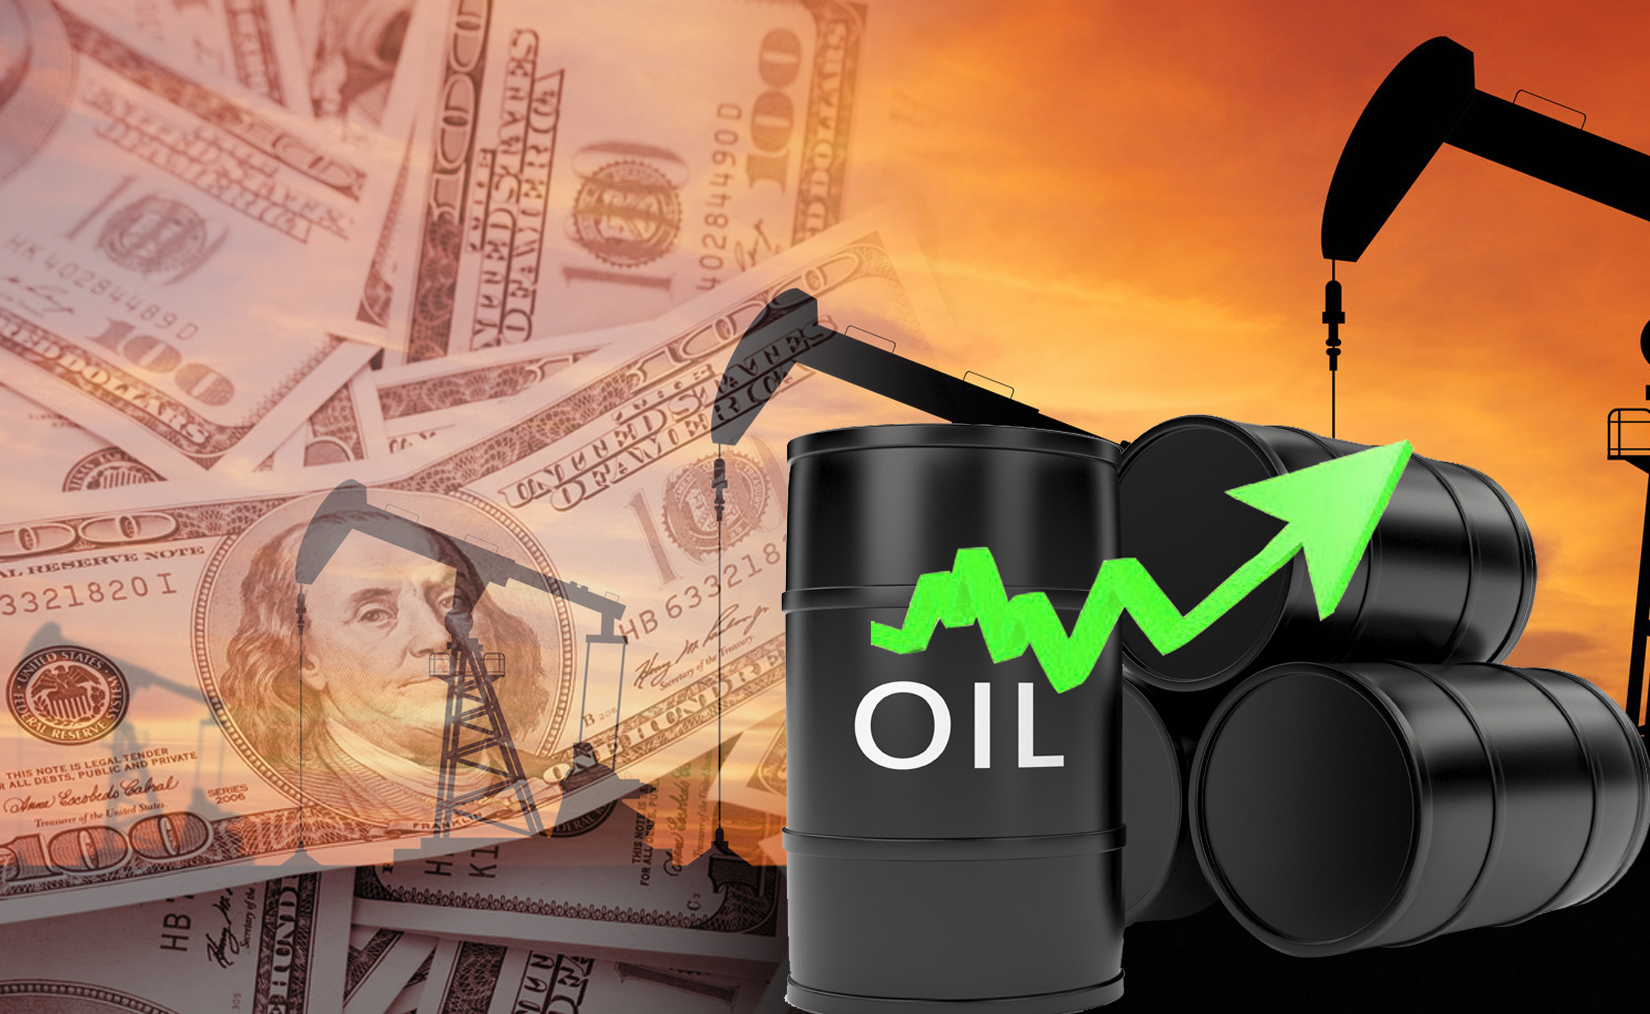 The price of Kuwaiti oil went up by 41 cents